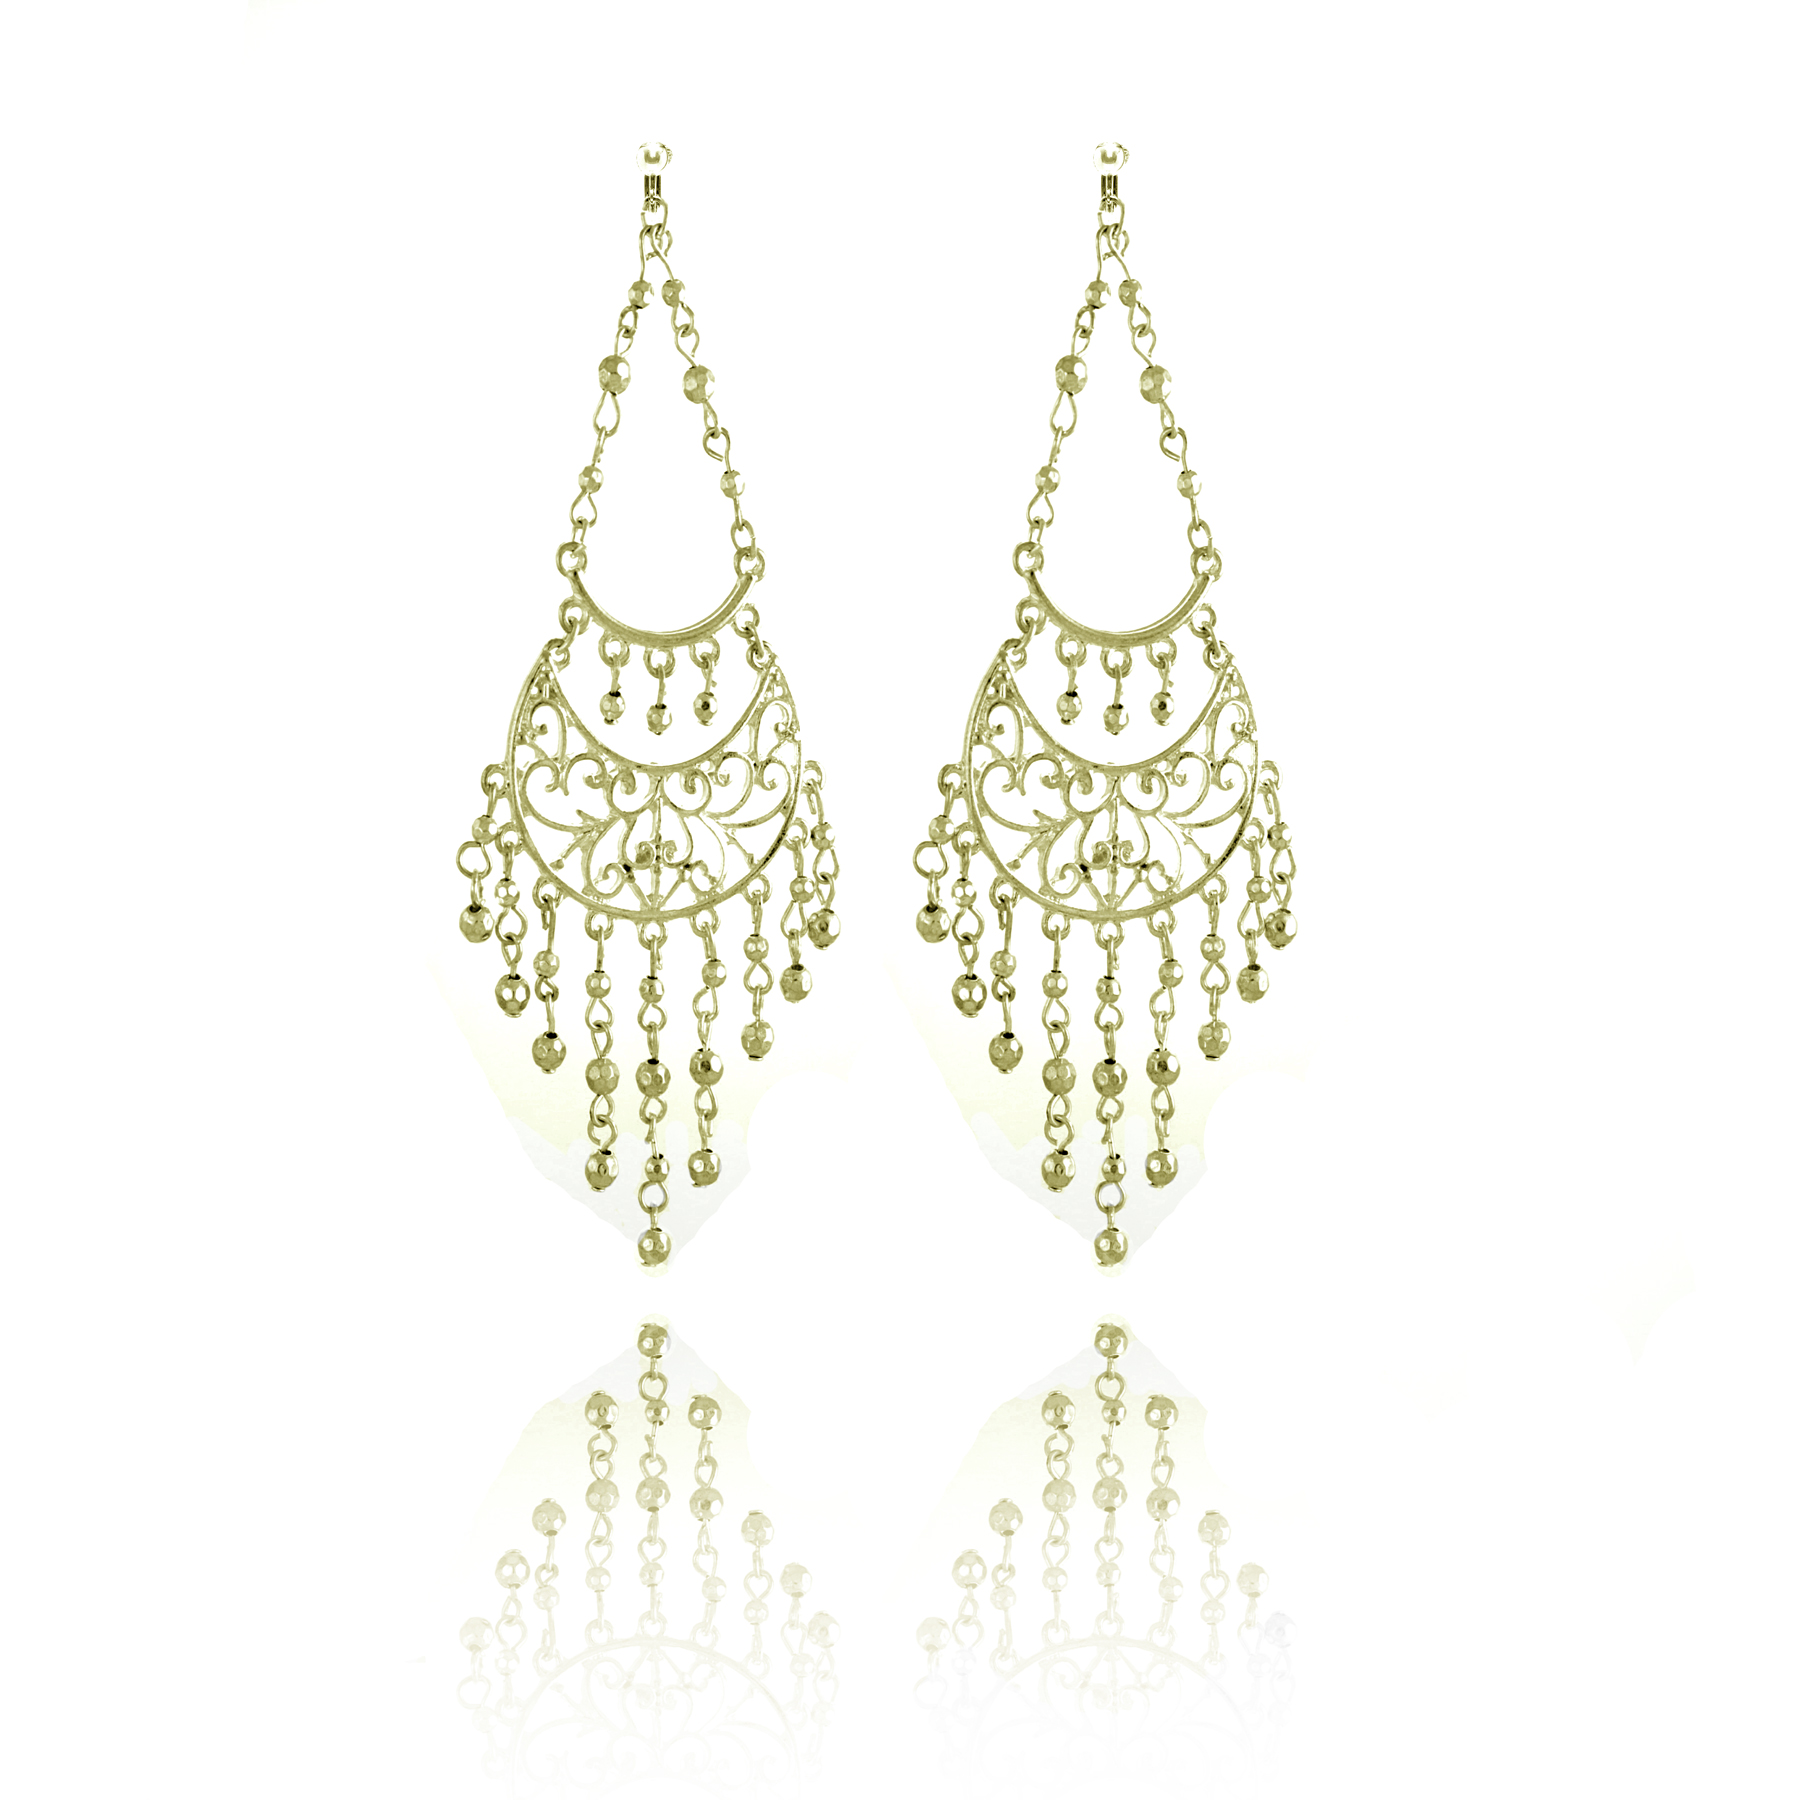 Accessories Ornate Crescent Chandelier Clip On Earrings - Gold